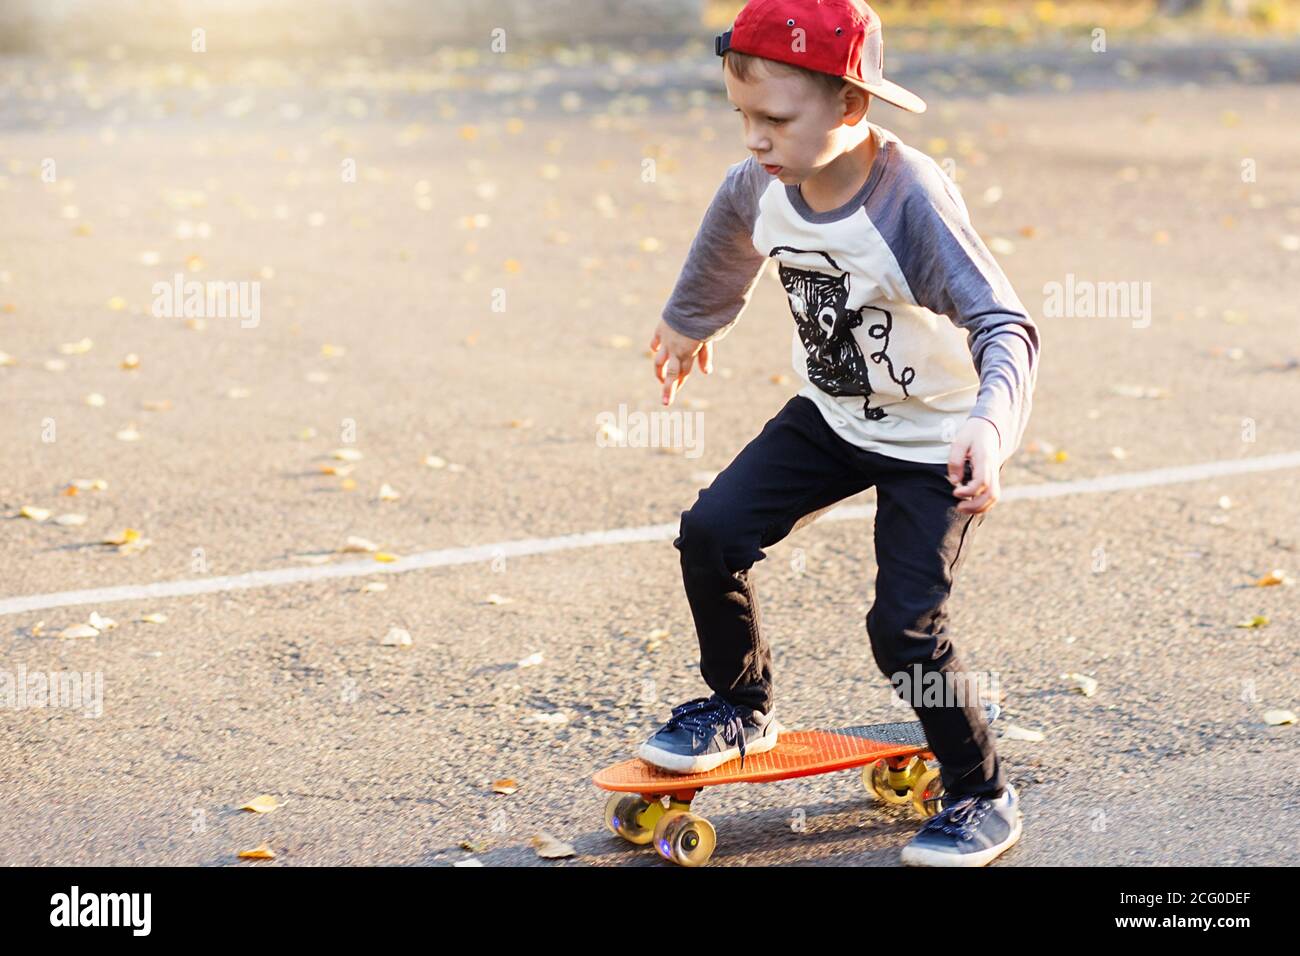 Little urban boy with a penny skateboard. Young kid riding in the park on a  skateboard. City style. Urban kids. Child learns to ride a penny board  Stock Photo - Alamy